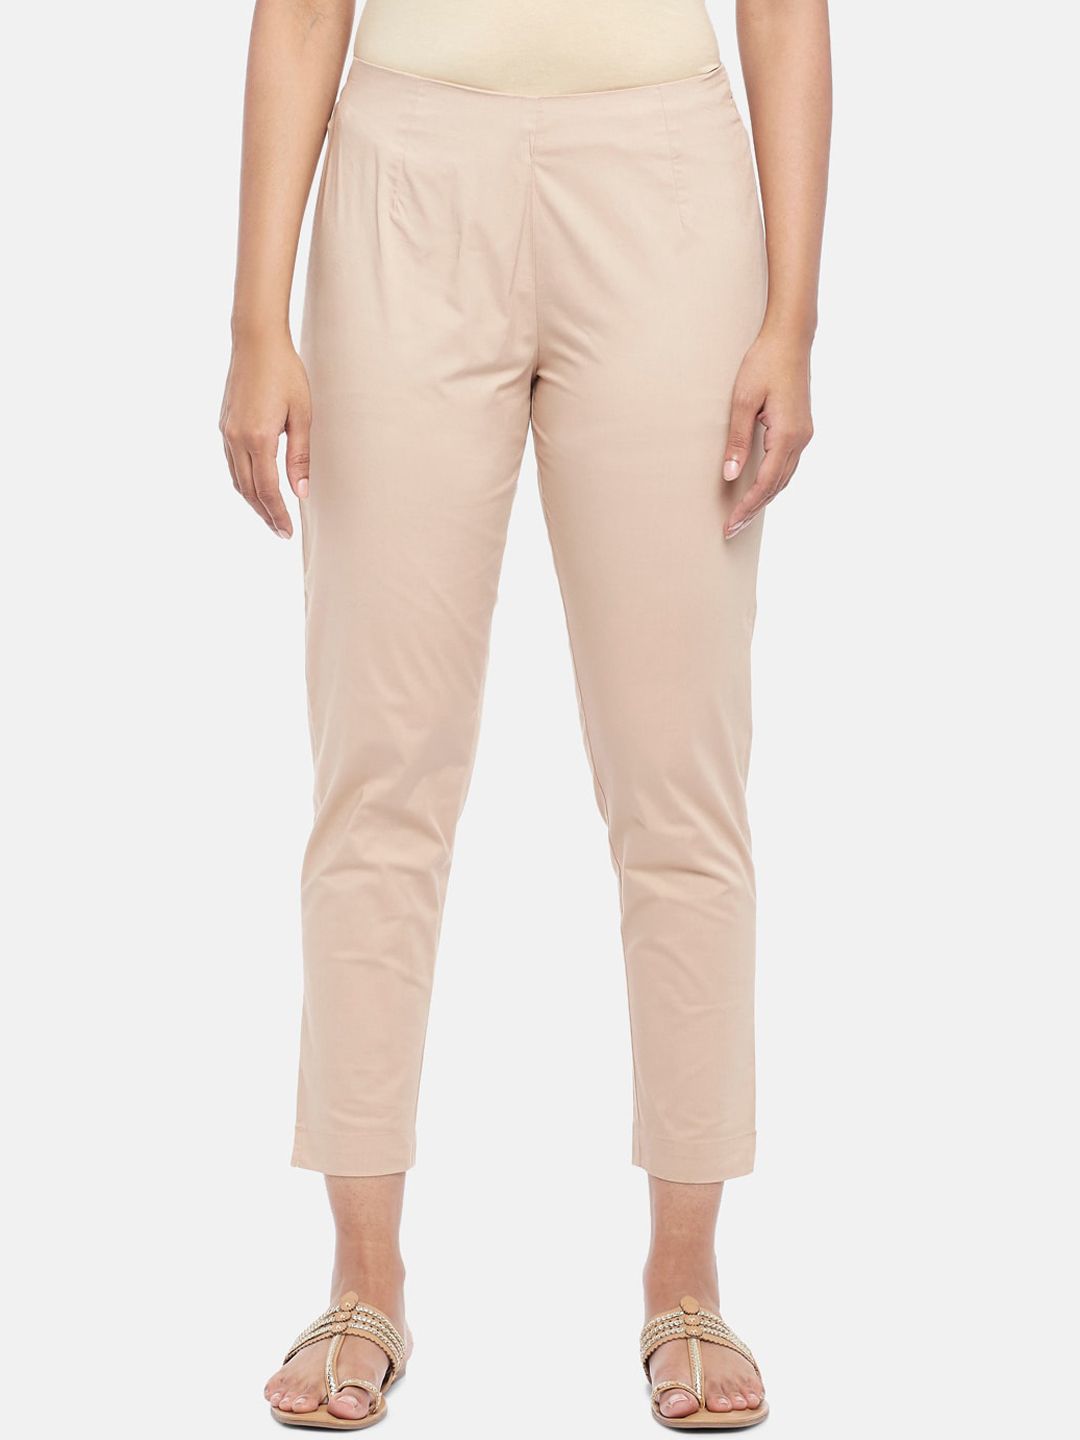 RANGMANCH BY PANTALOONS Women Beige Cigarette Trousers Price in India